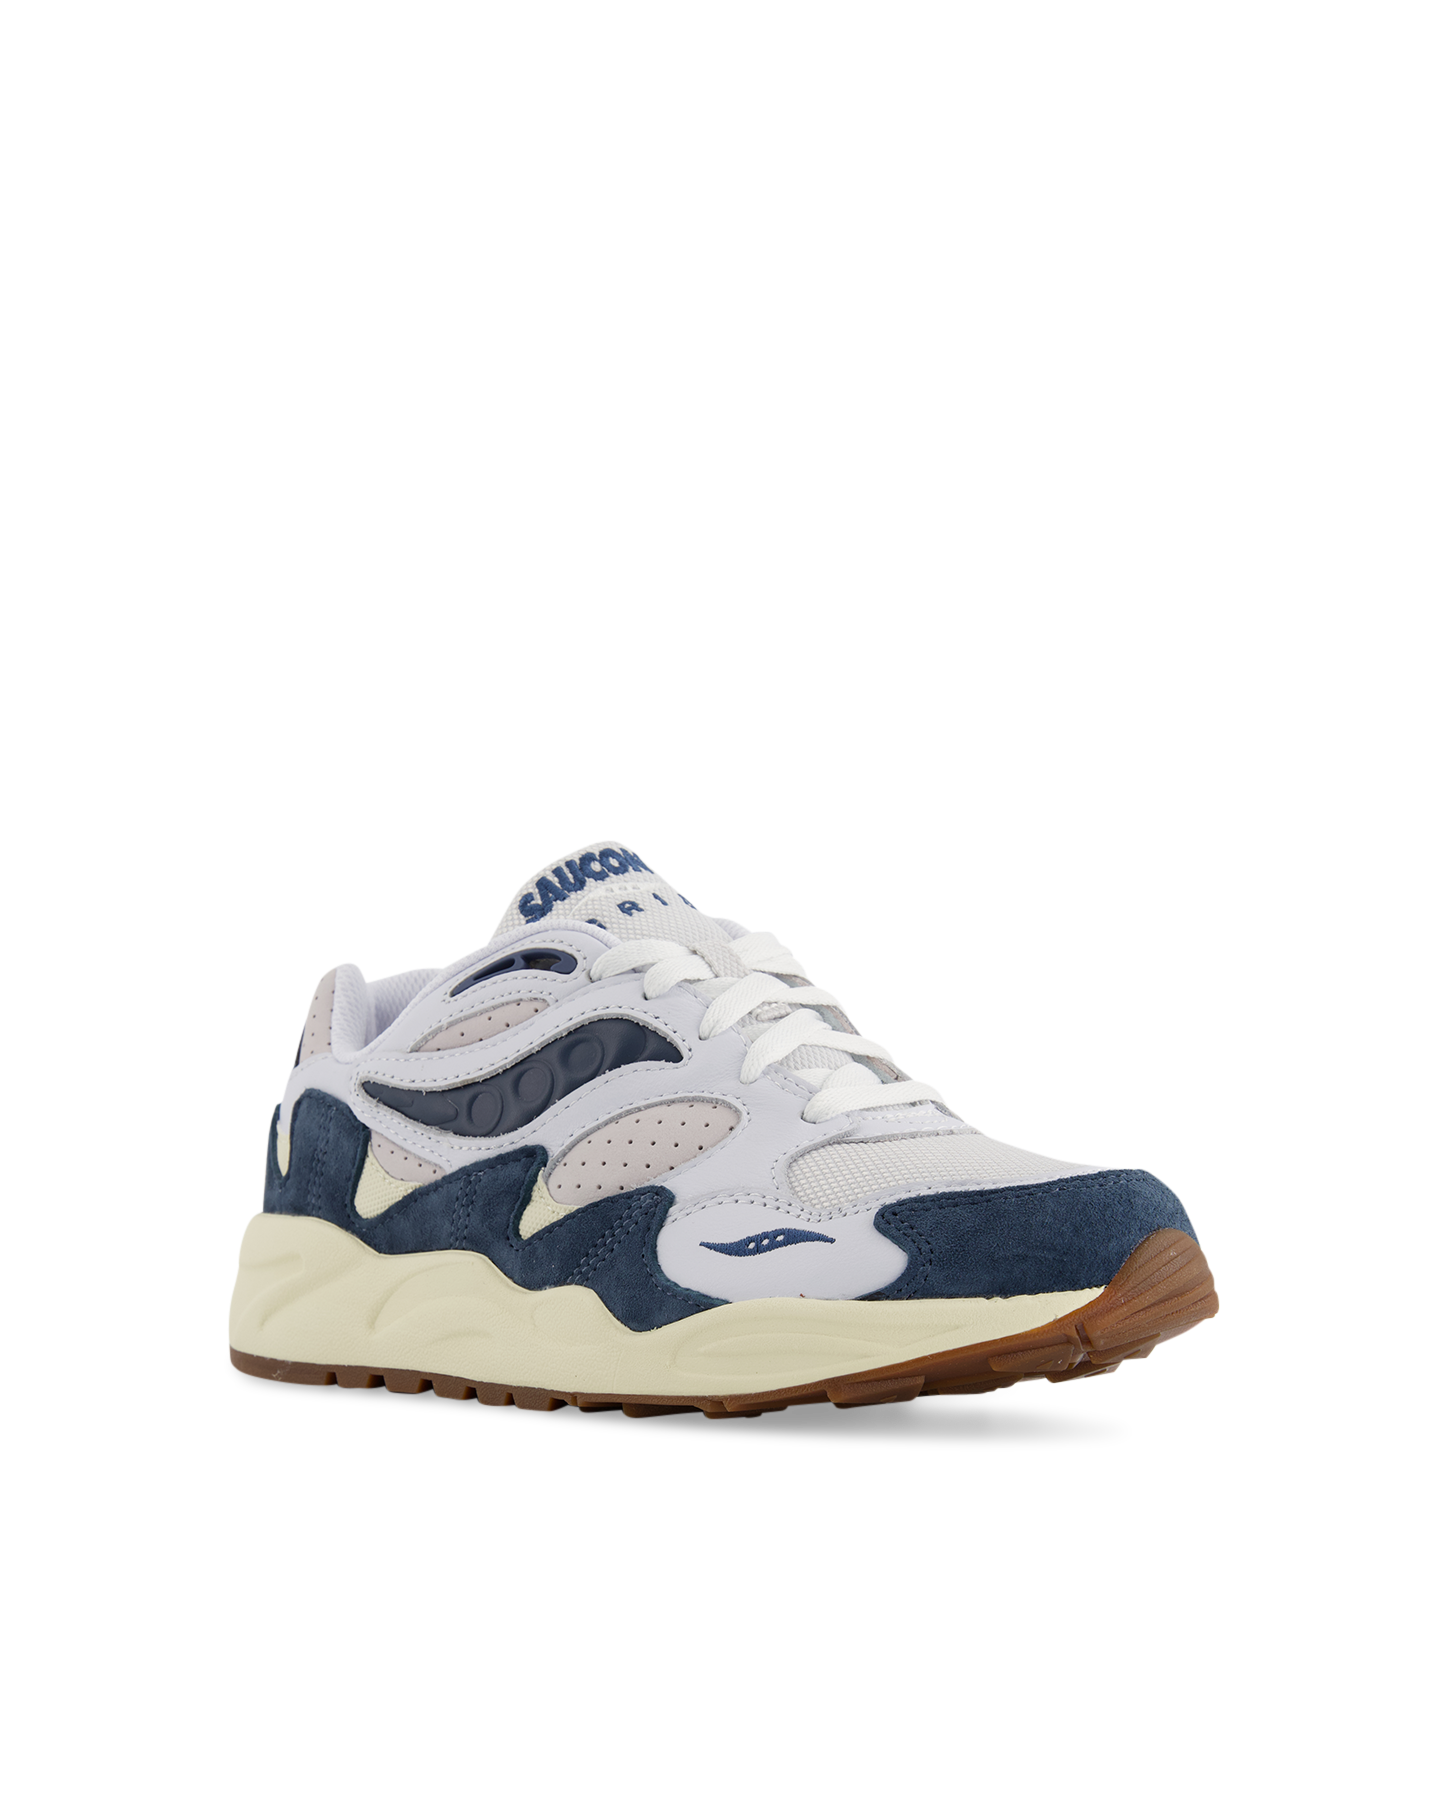 Saucony Grid Shadow 2 - White/Navy NAVY 2